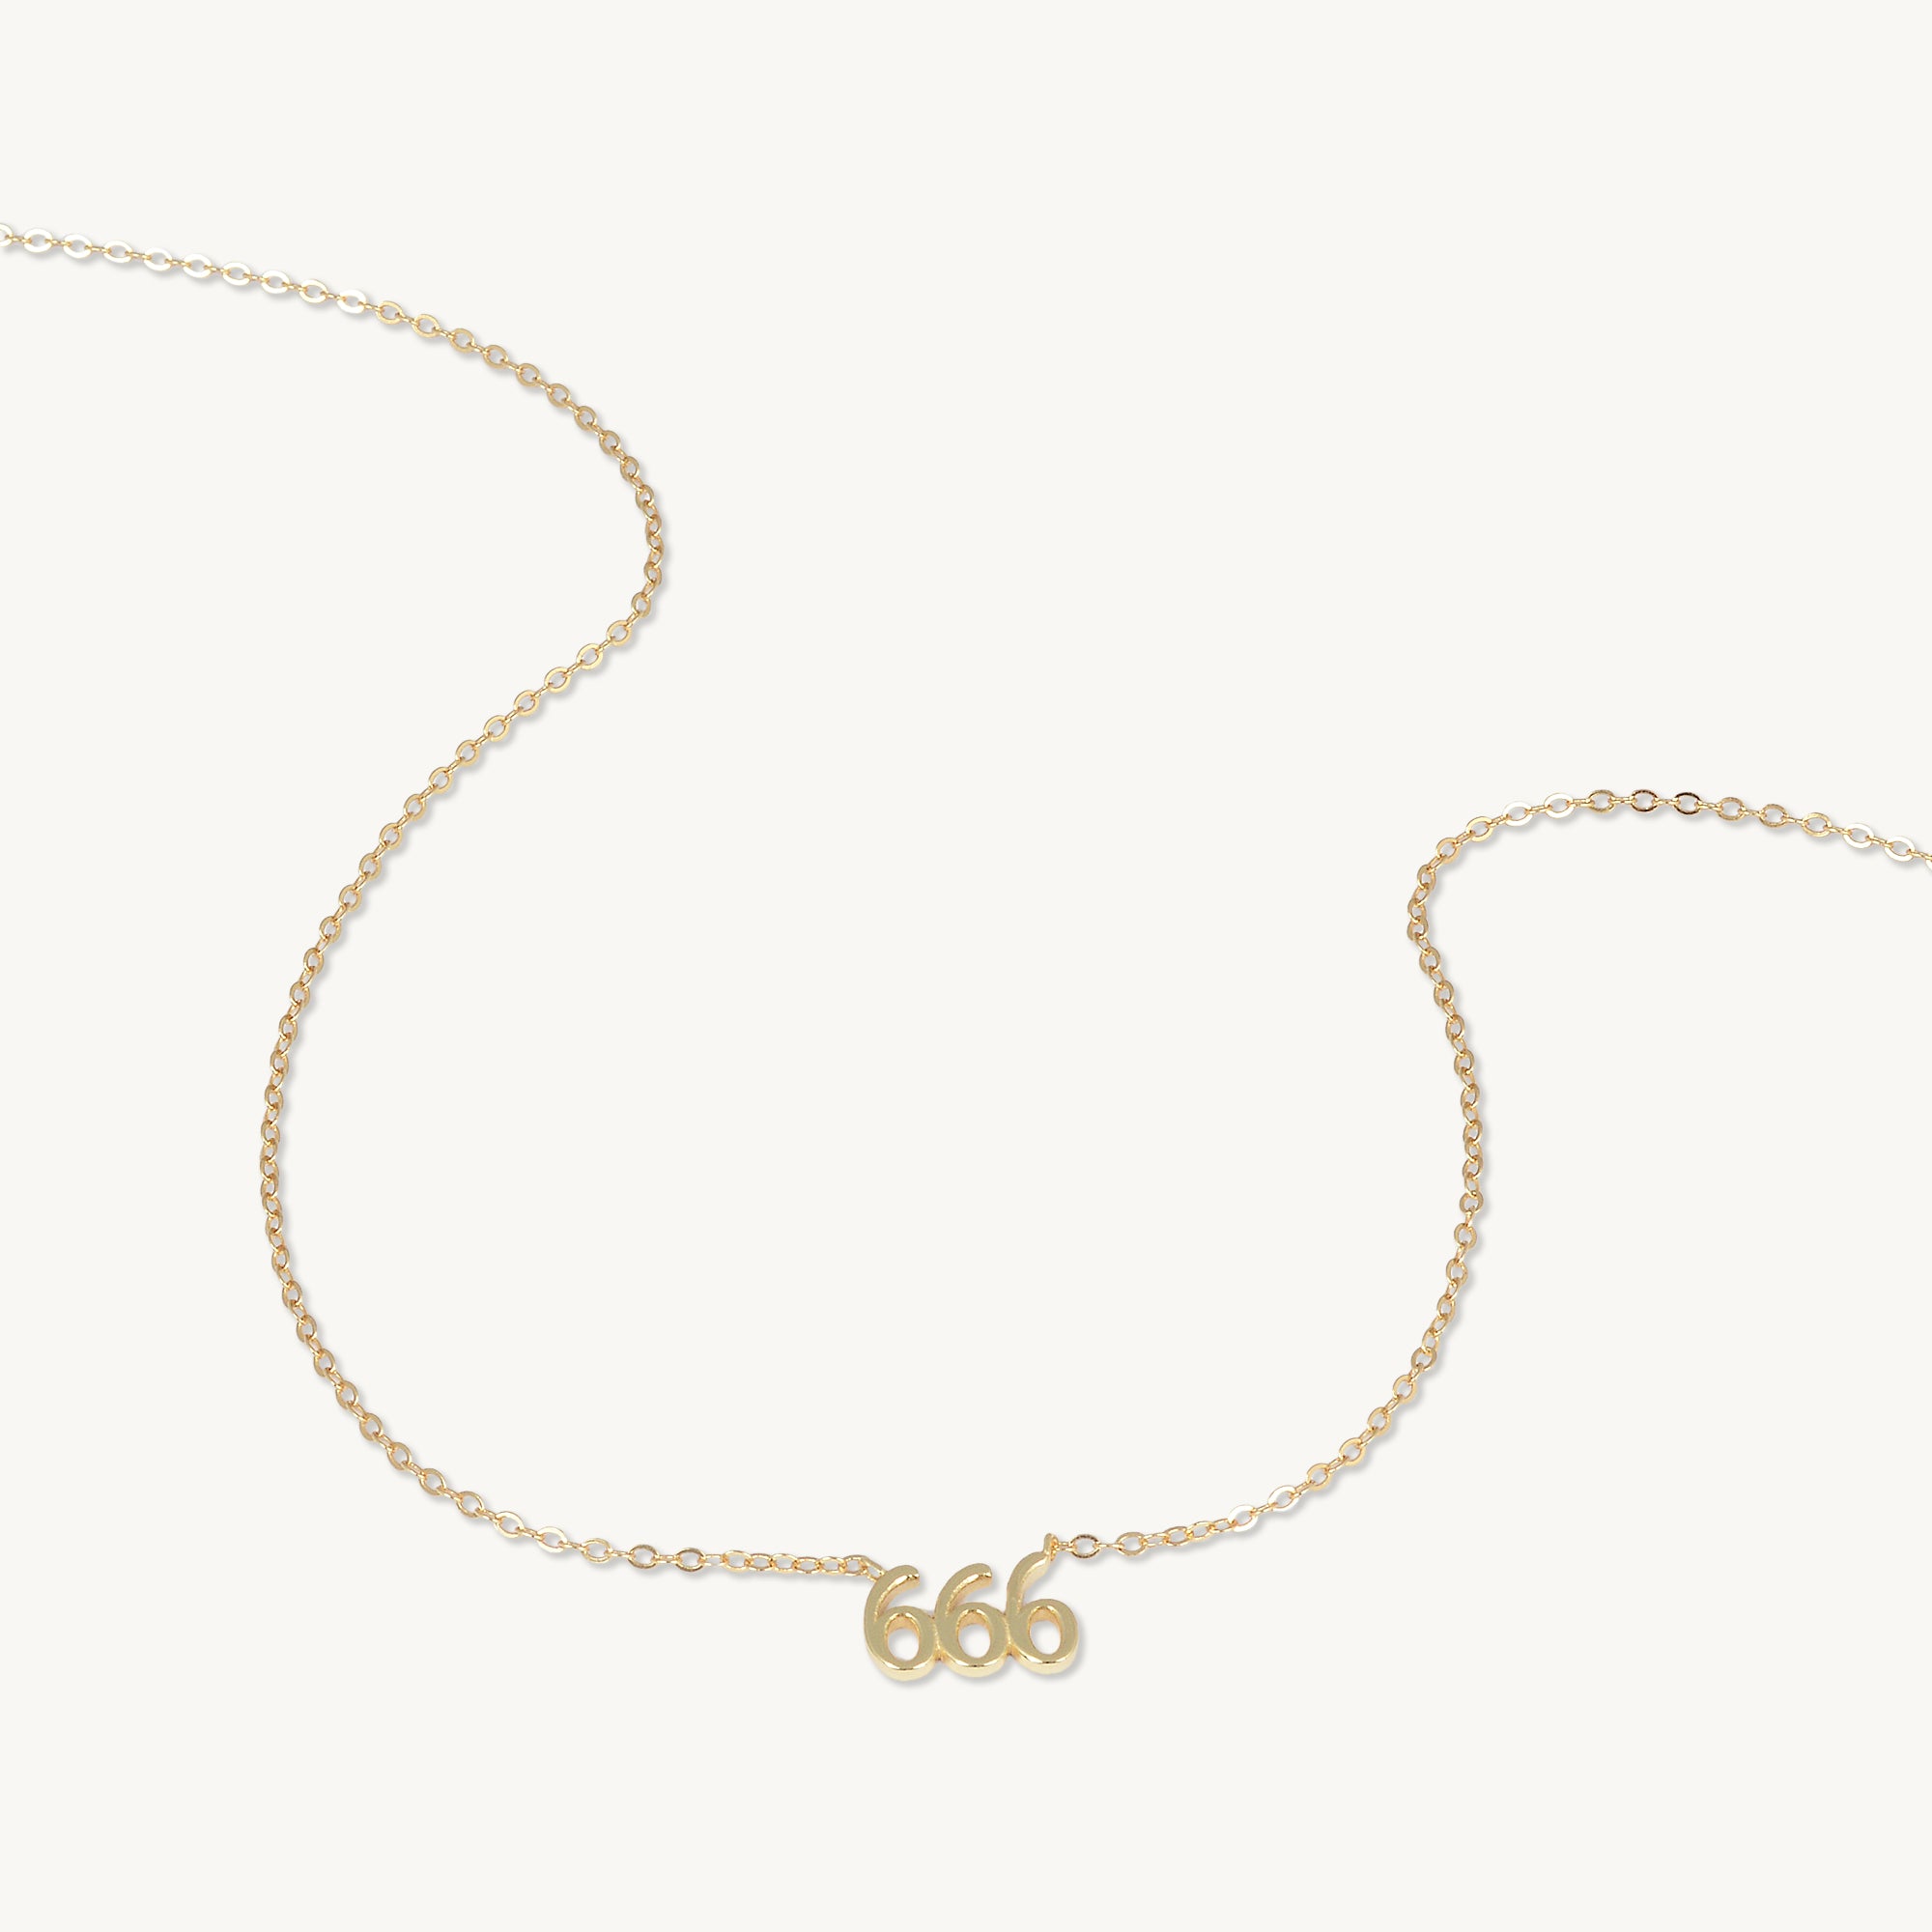 666 Angel Number Pendant Necklace